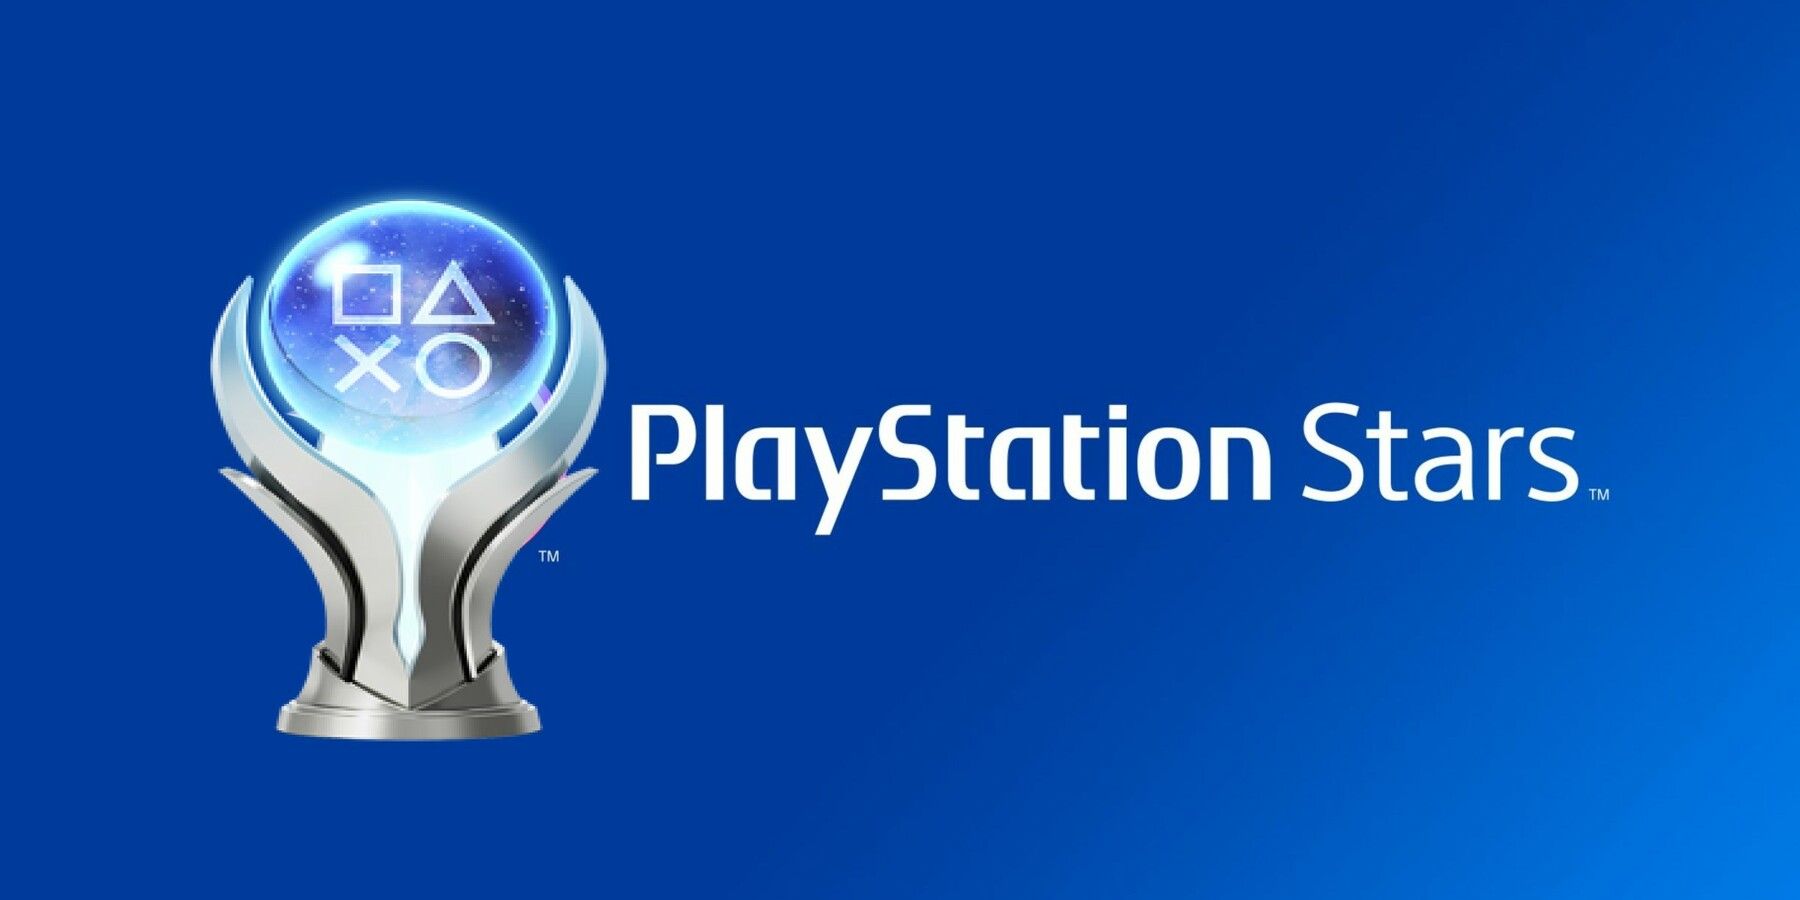 playstation-stars-logo-with-trophy